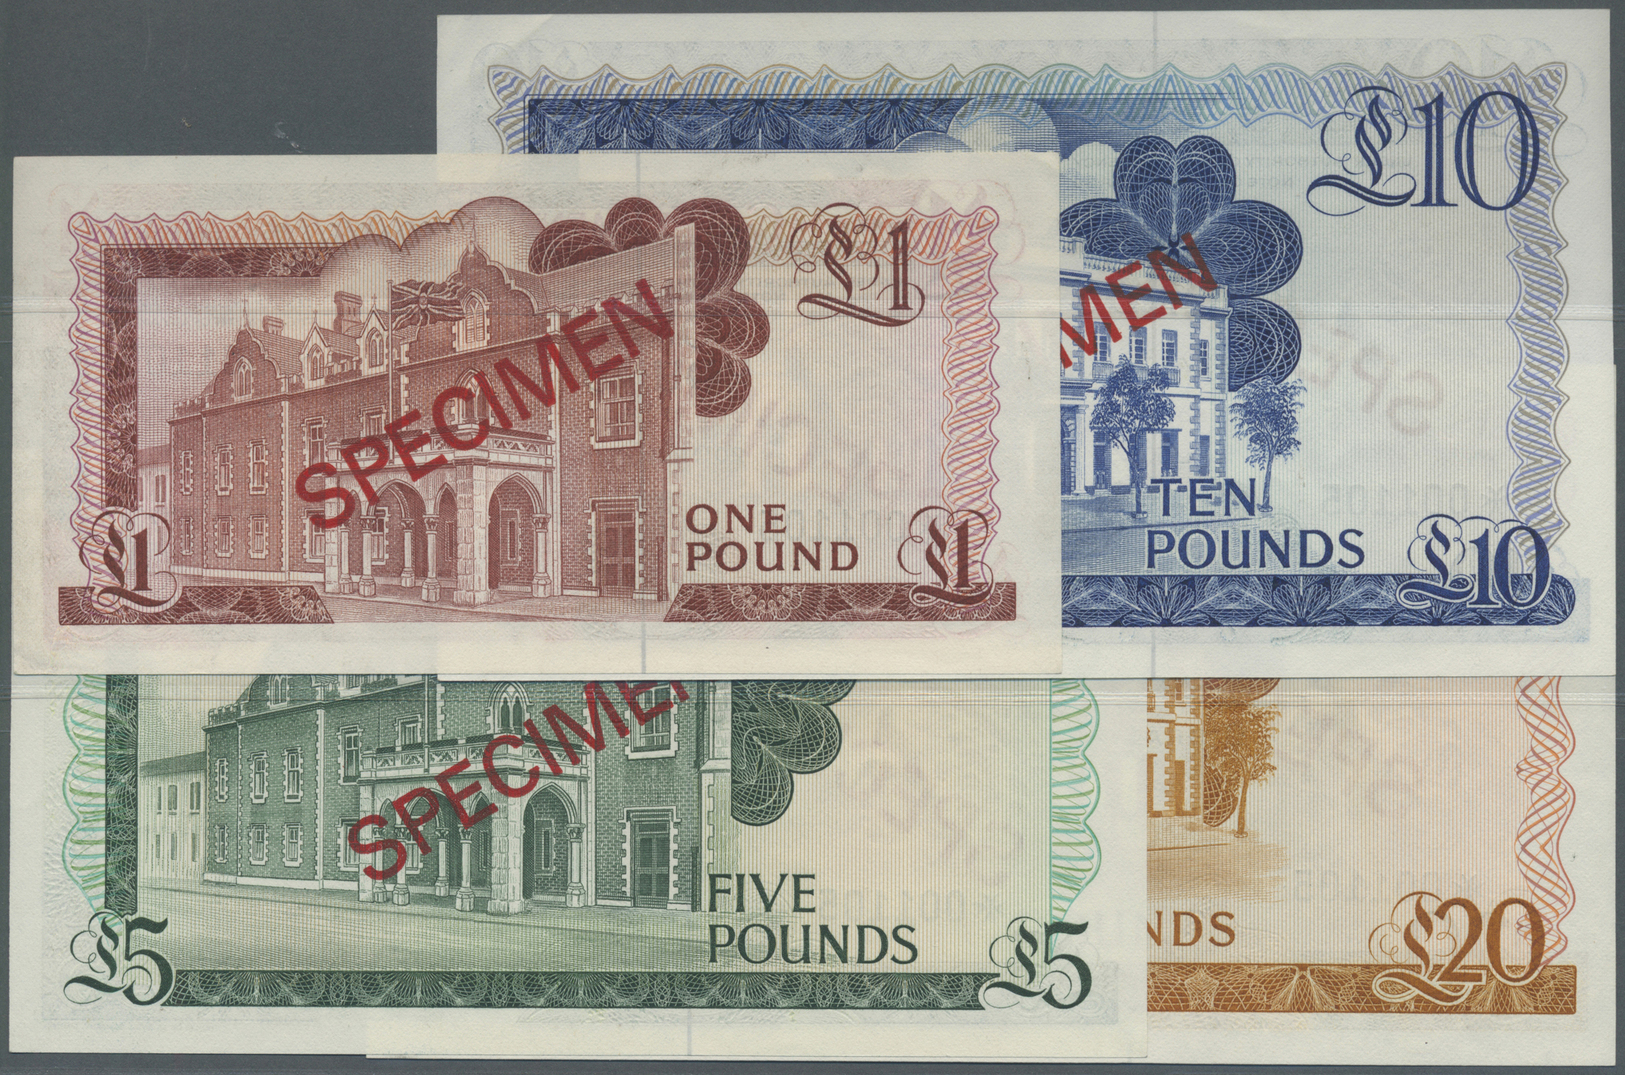 00897 Gibraltar: Set Of 4 Specimen Notes, Collectors Series Containing 1, 5, 10 And 20 Pounds 1975 P. CS1, The First Two - Gibraltar